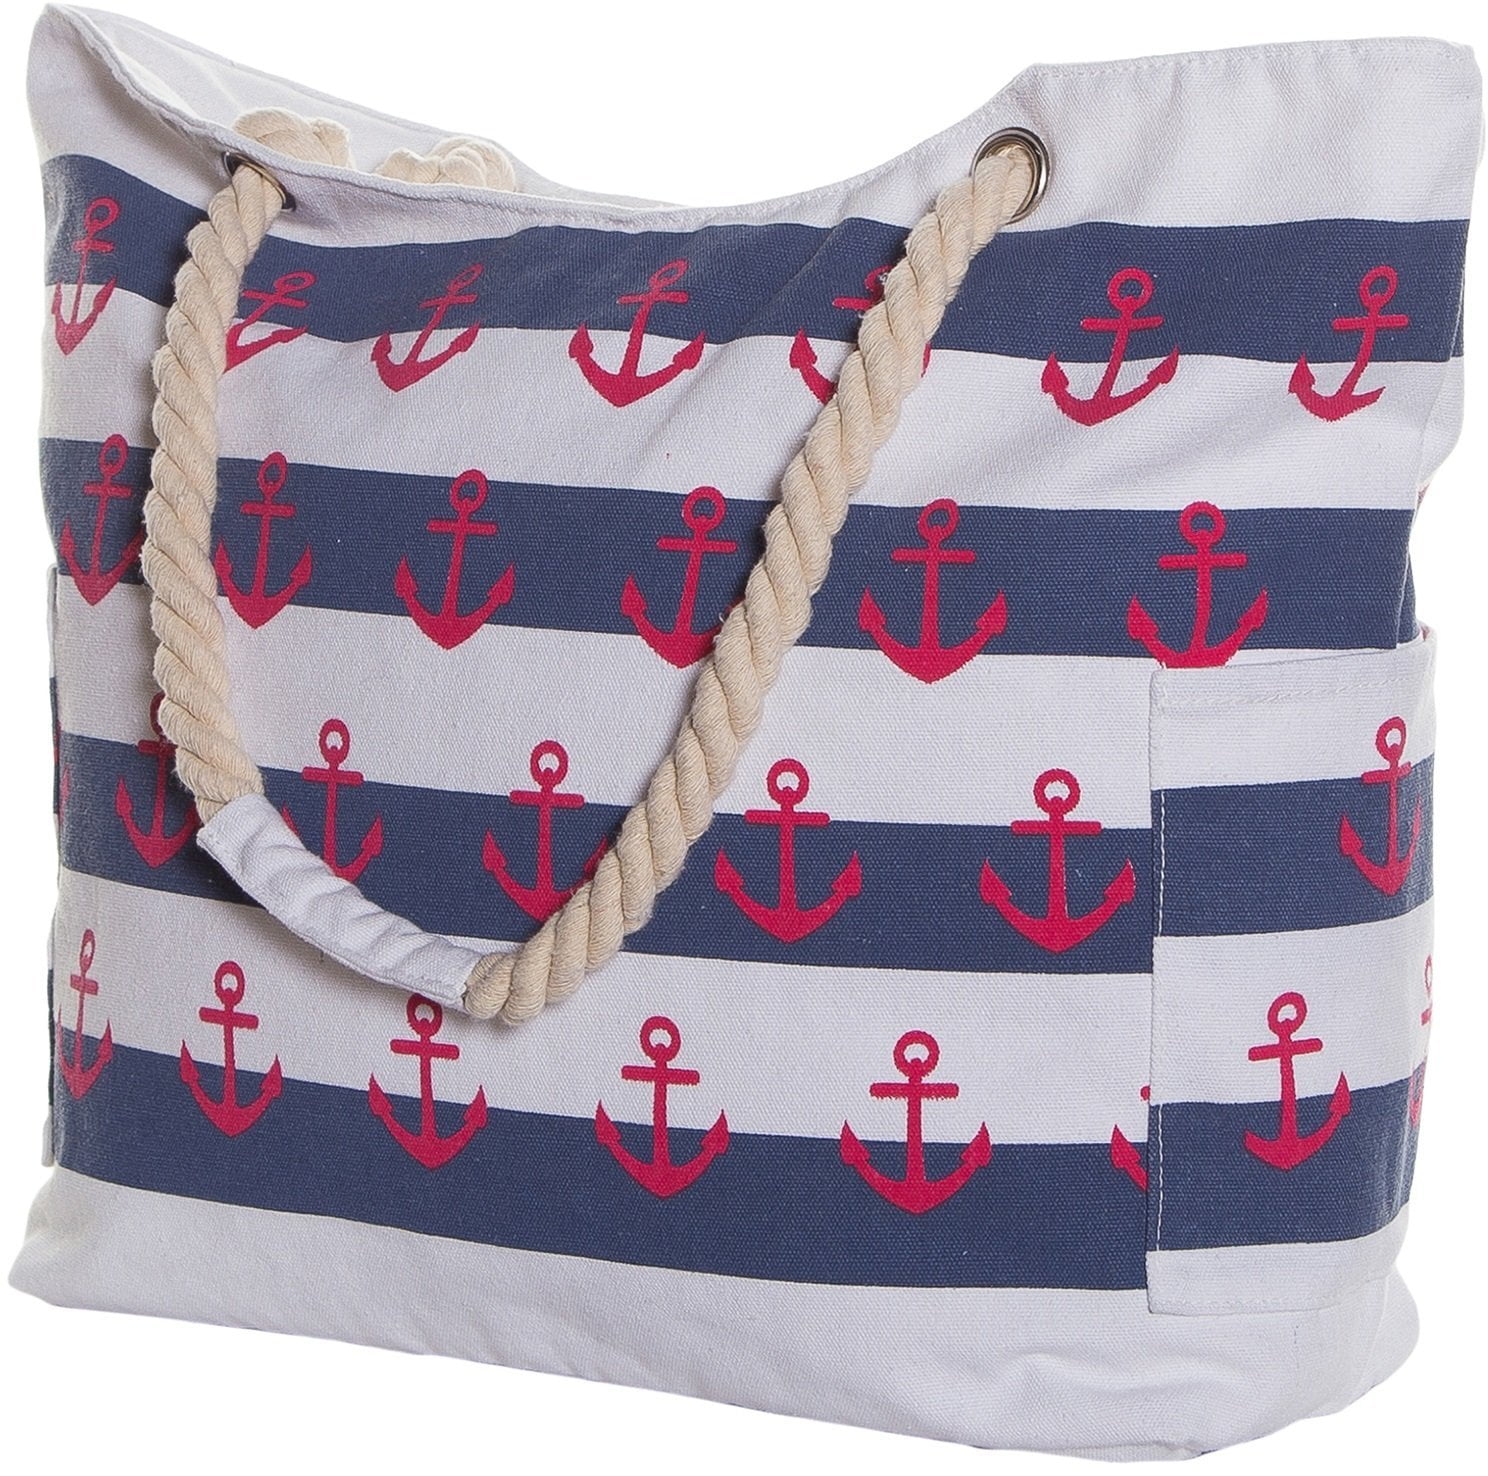 large beach bag with compartments